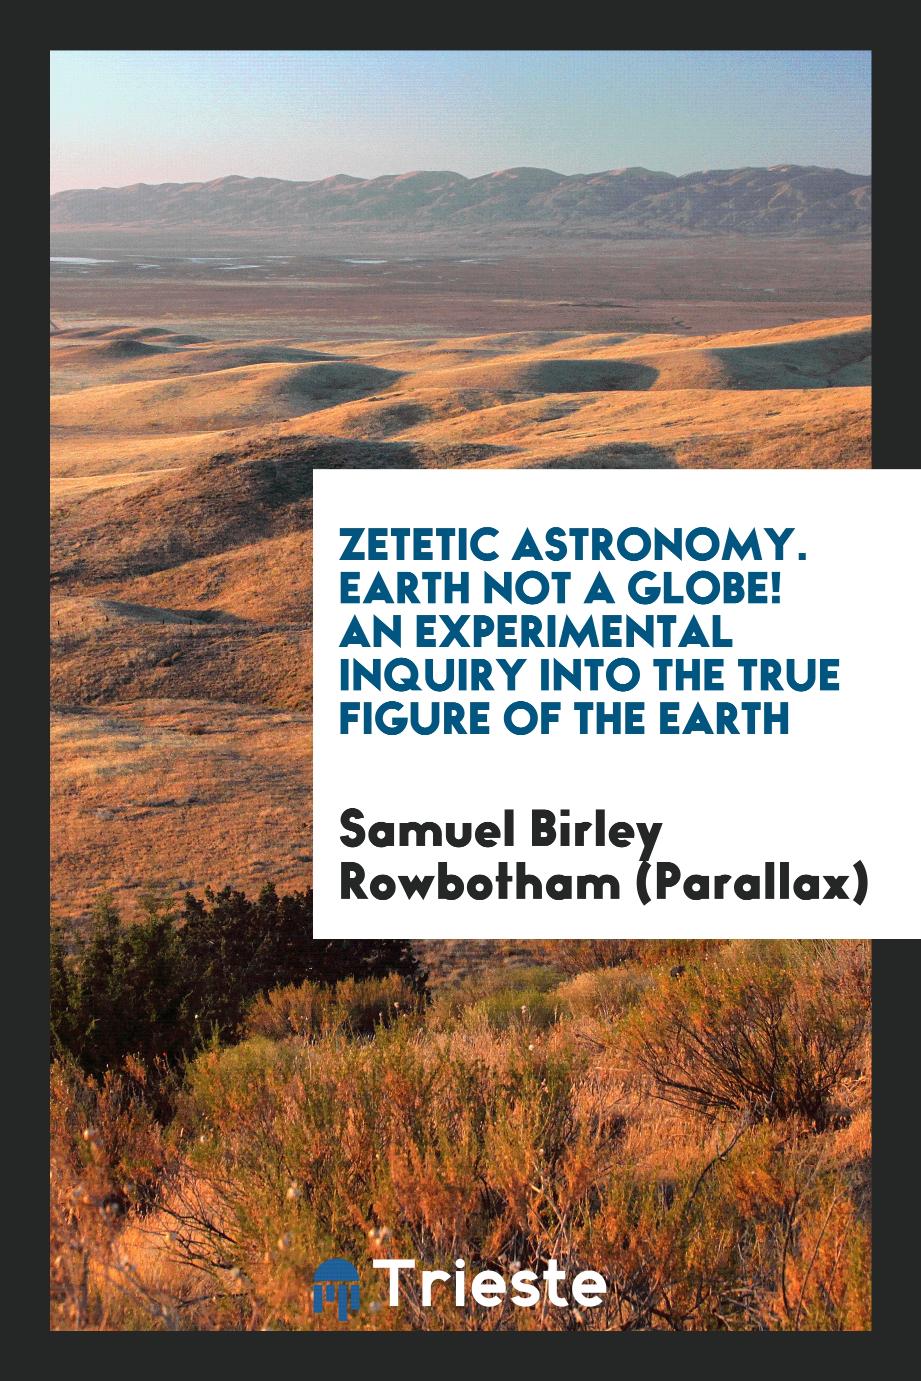 Zetetic Astronomy. Earth Not a Globe! An Experimental Inquiry into the True Figure of the Earth